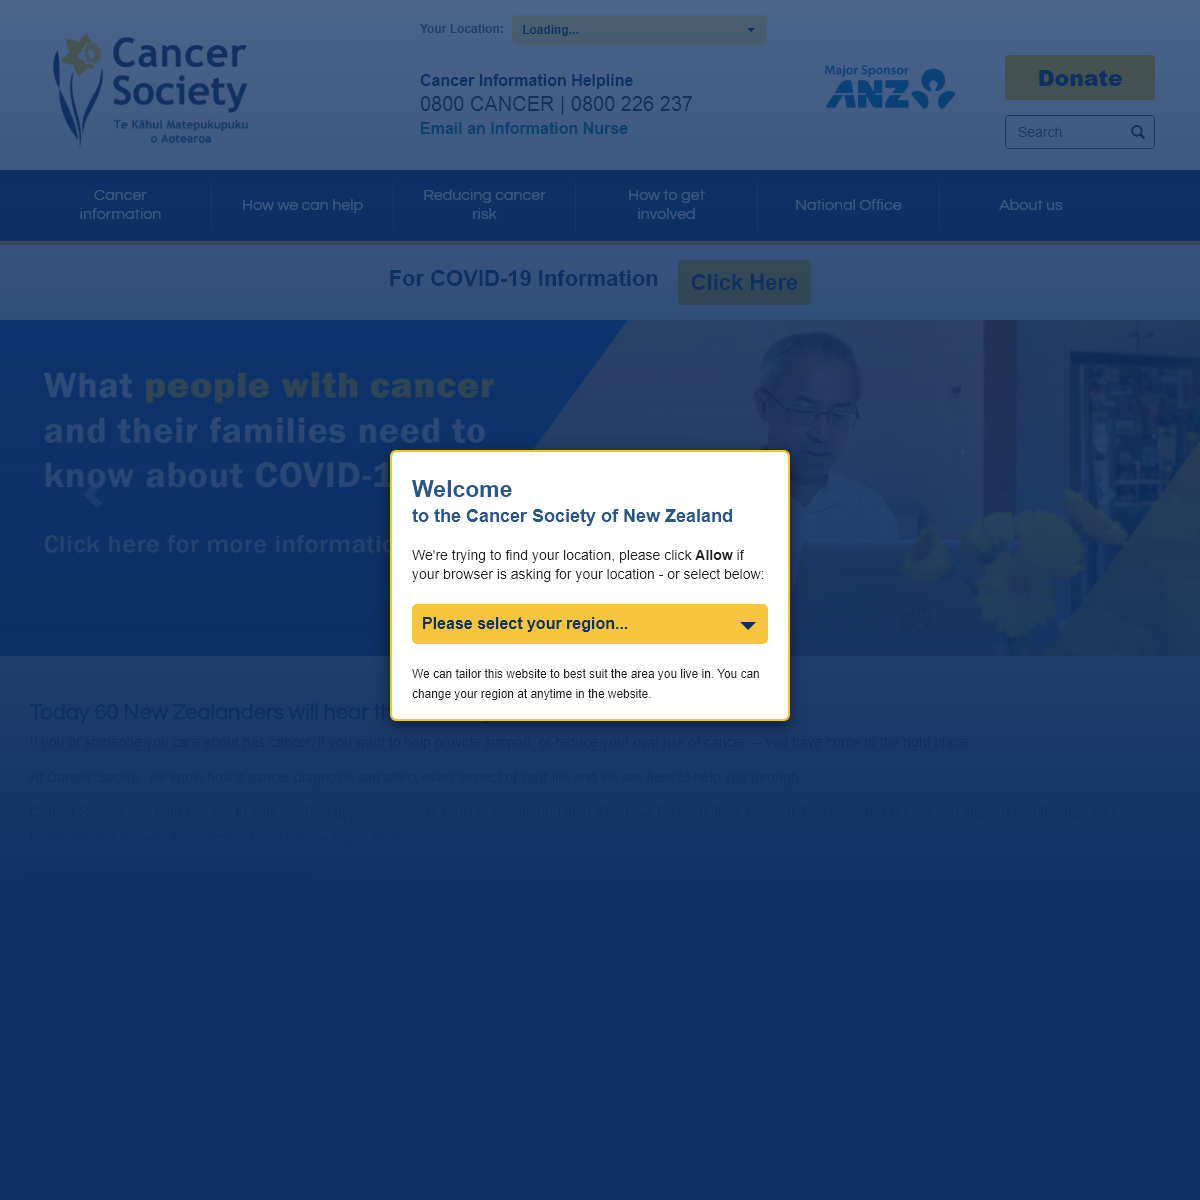 A complete backup of cancernz.org.nz